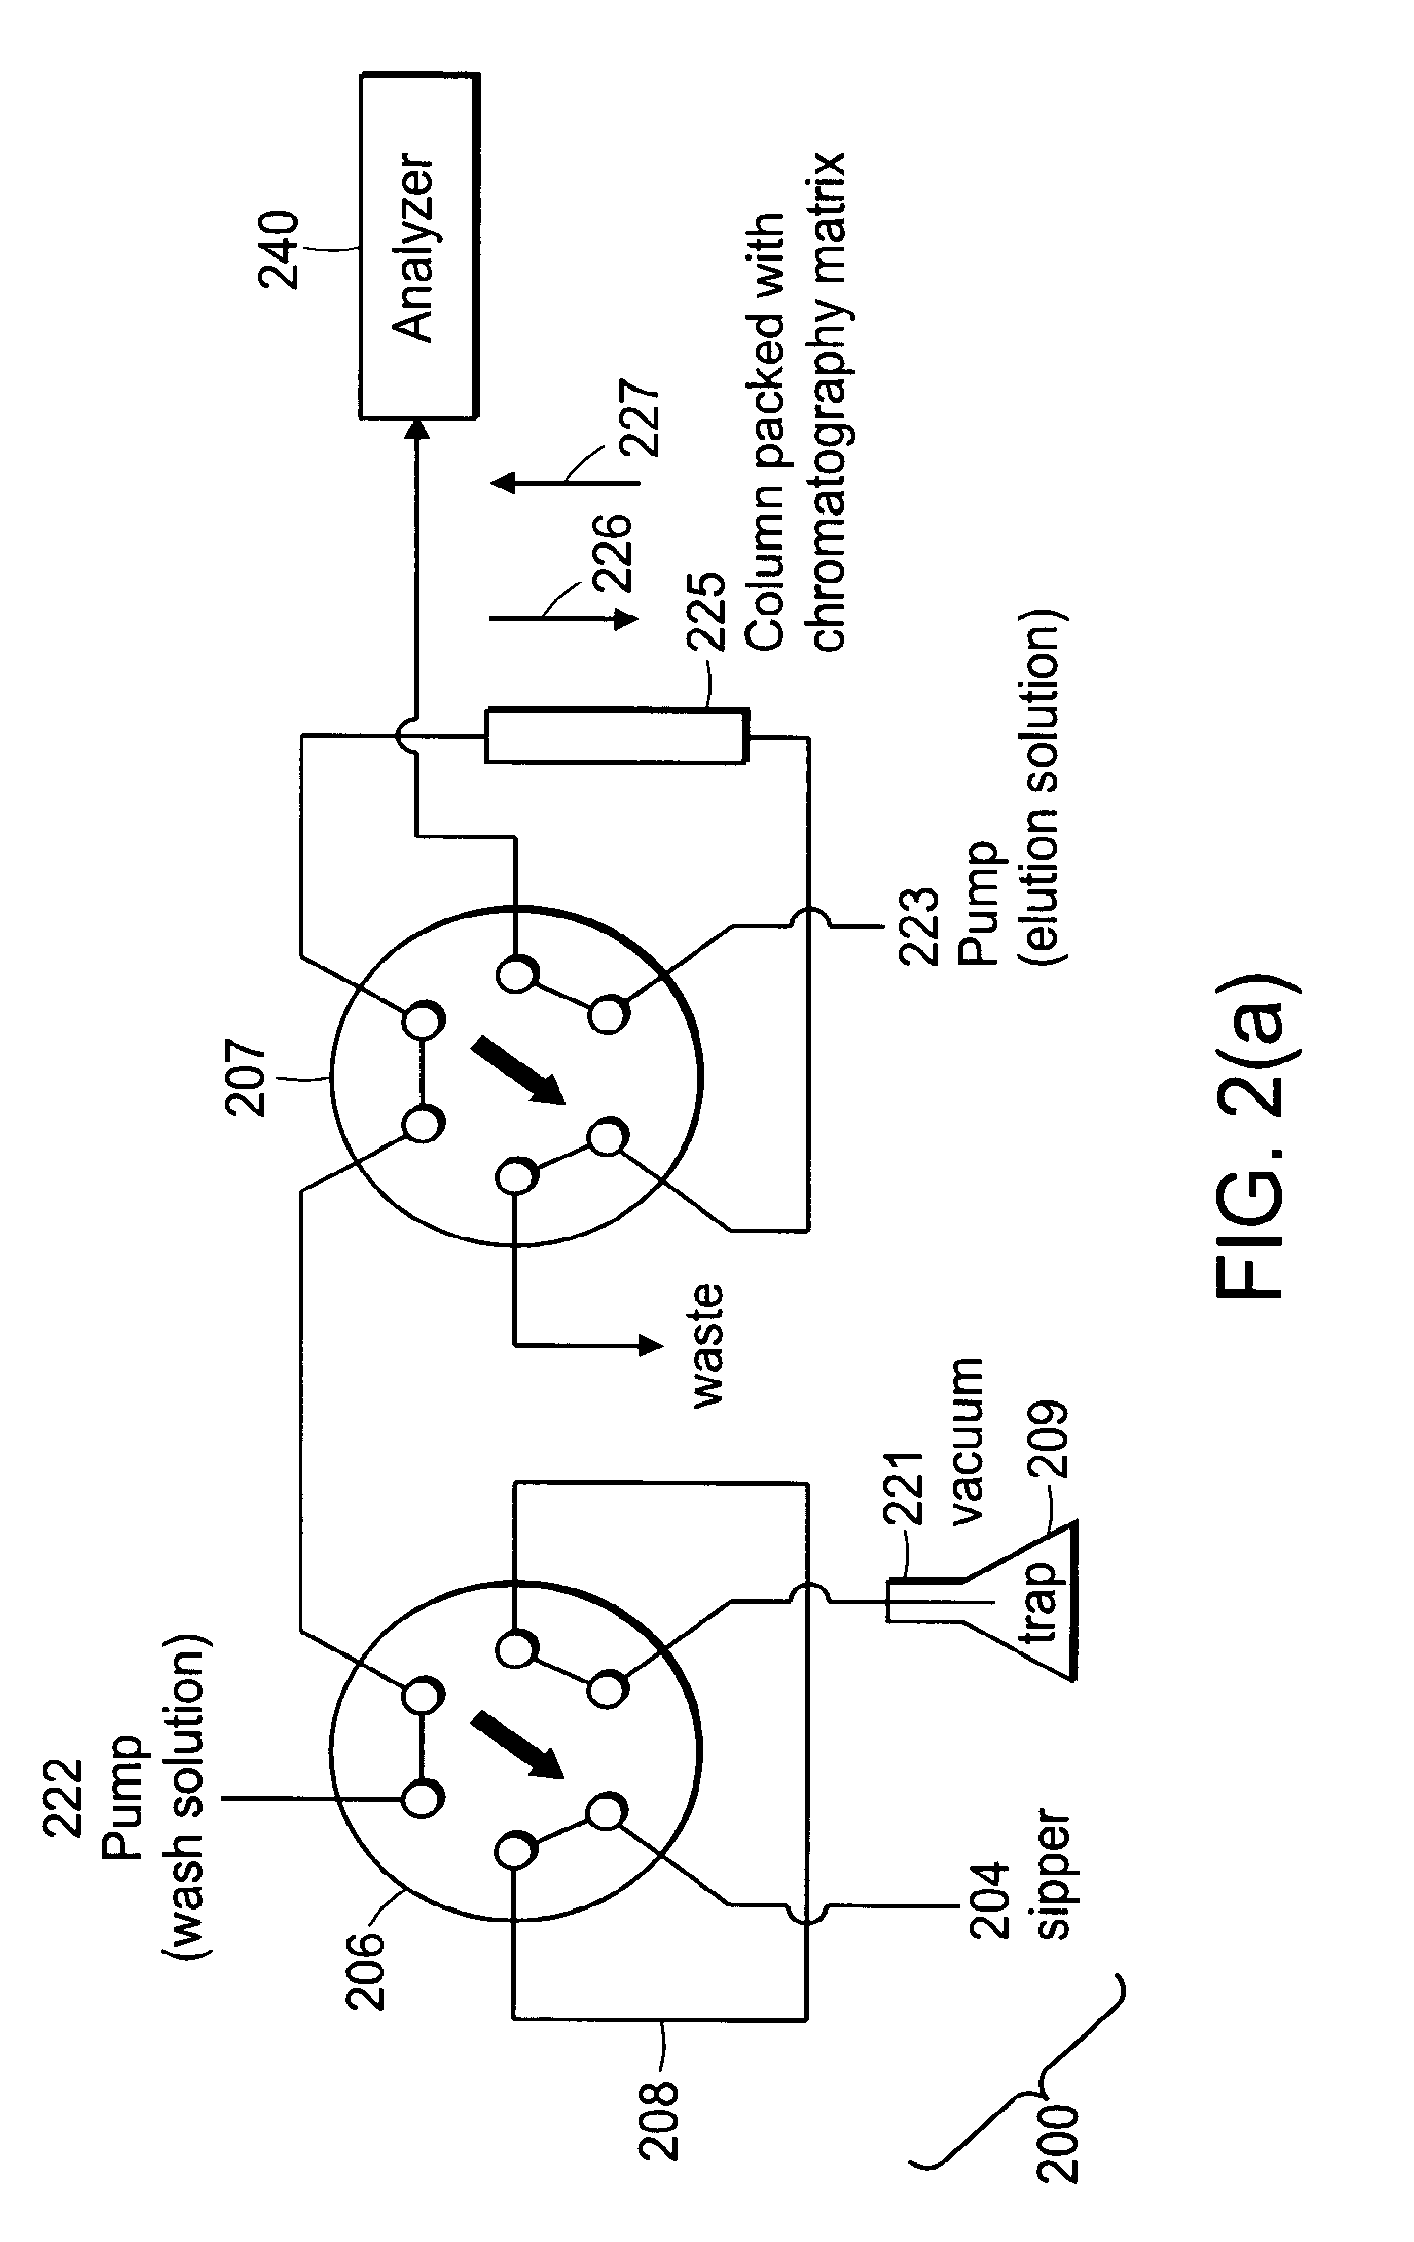 Systems and methods for high-throughput screening of fluidic samples